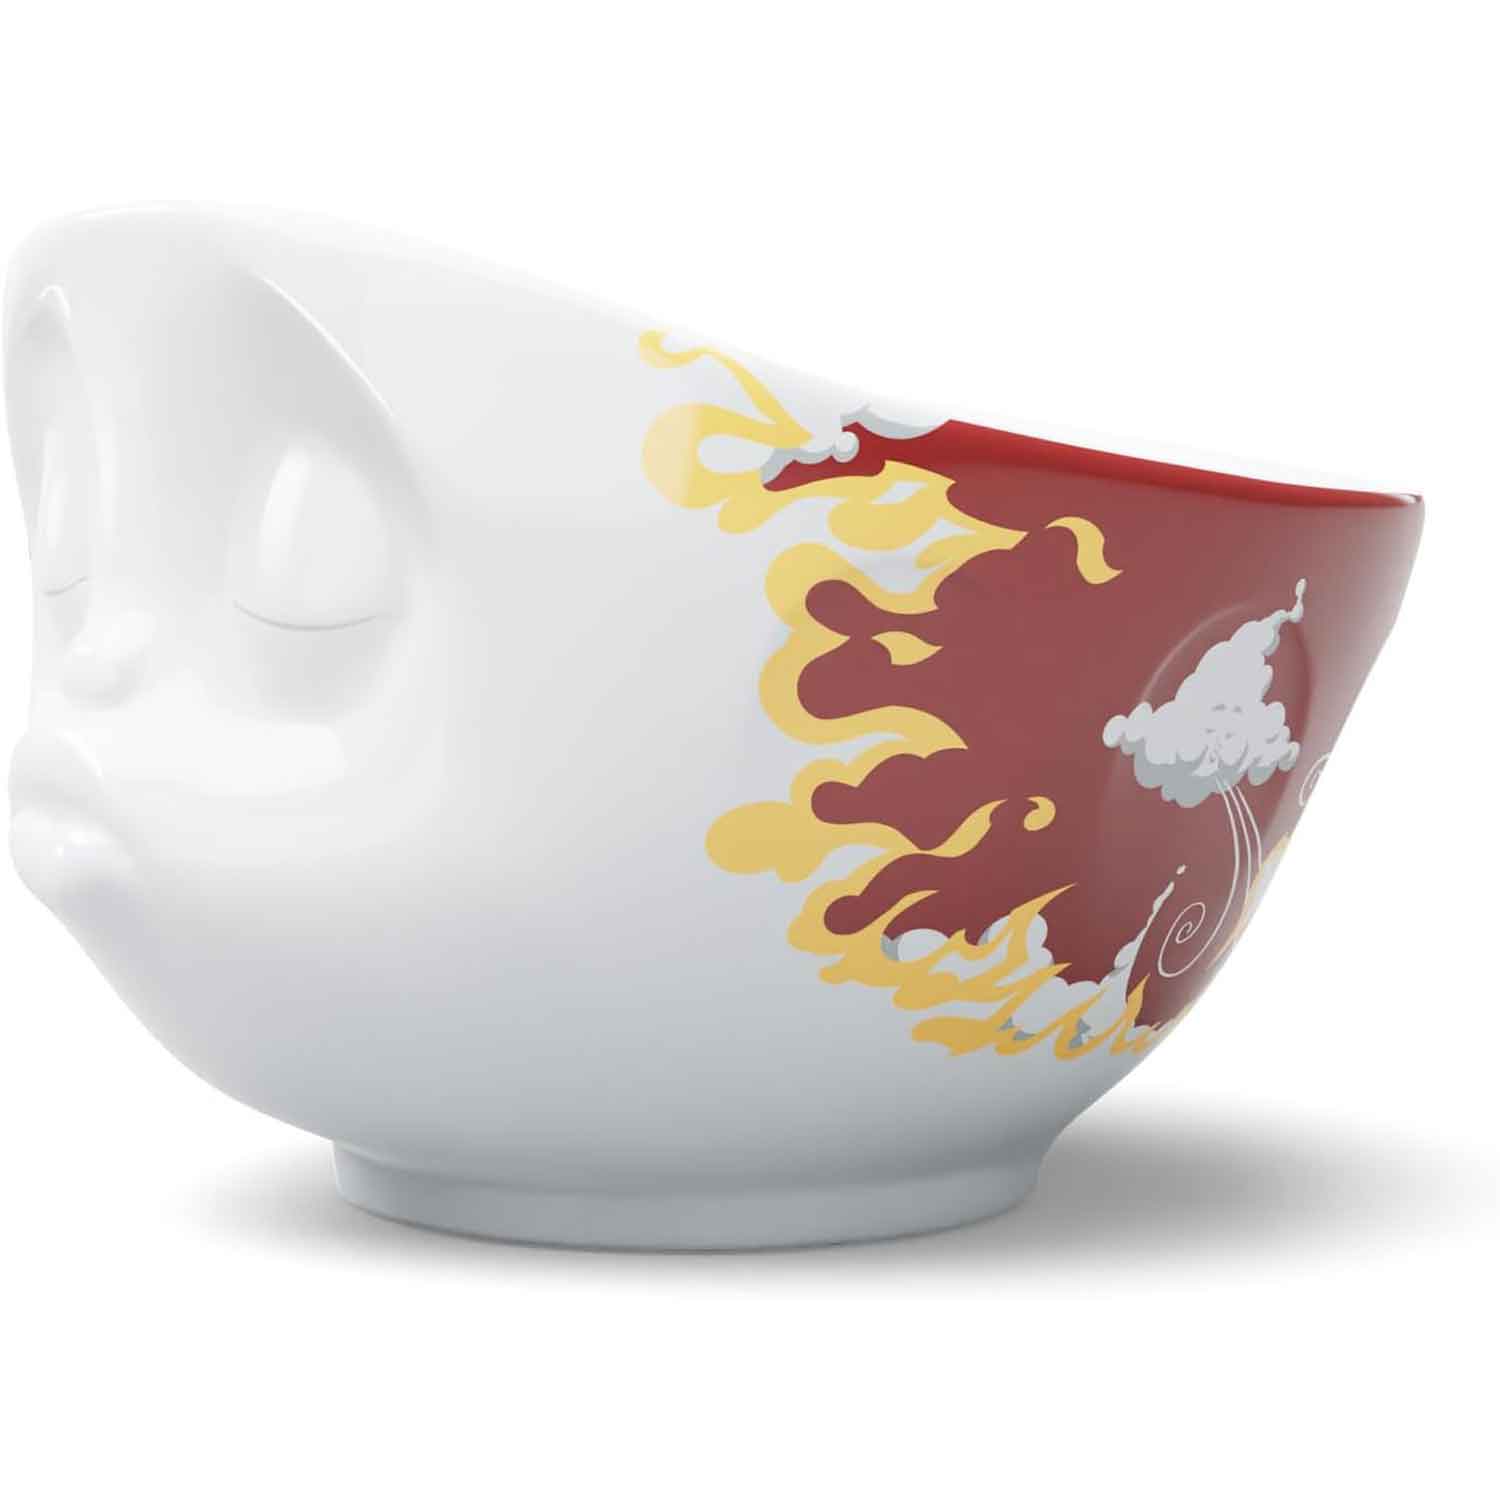 Bowl Fiery Special Edition - TV cups